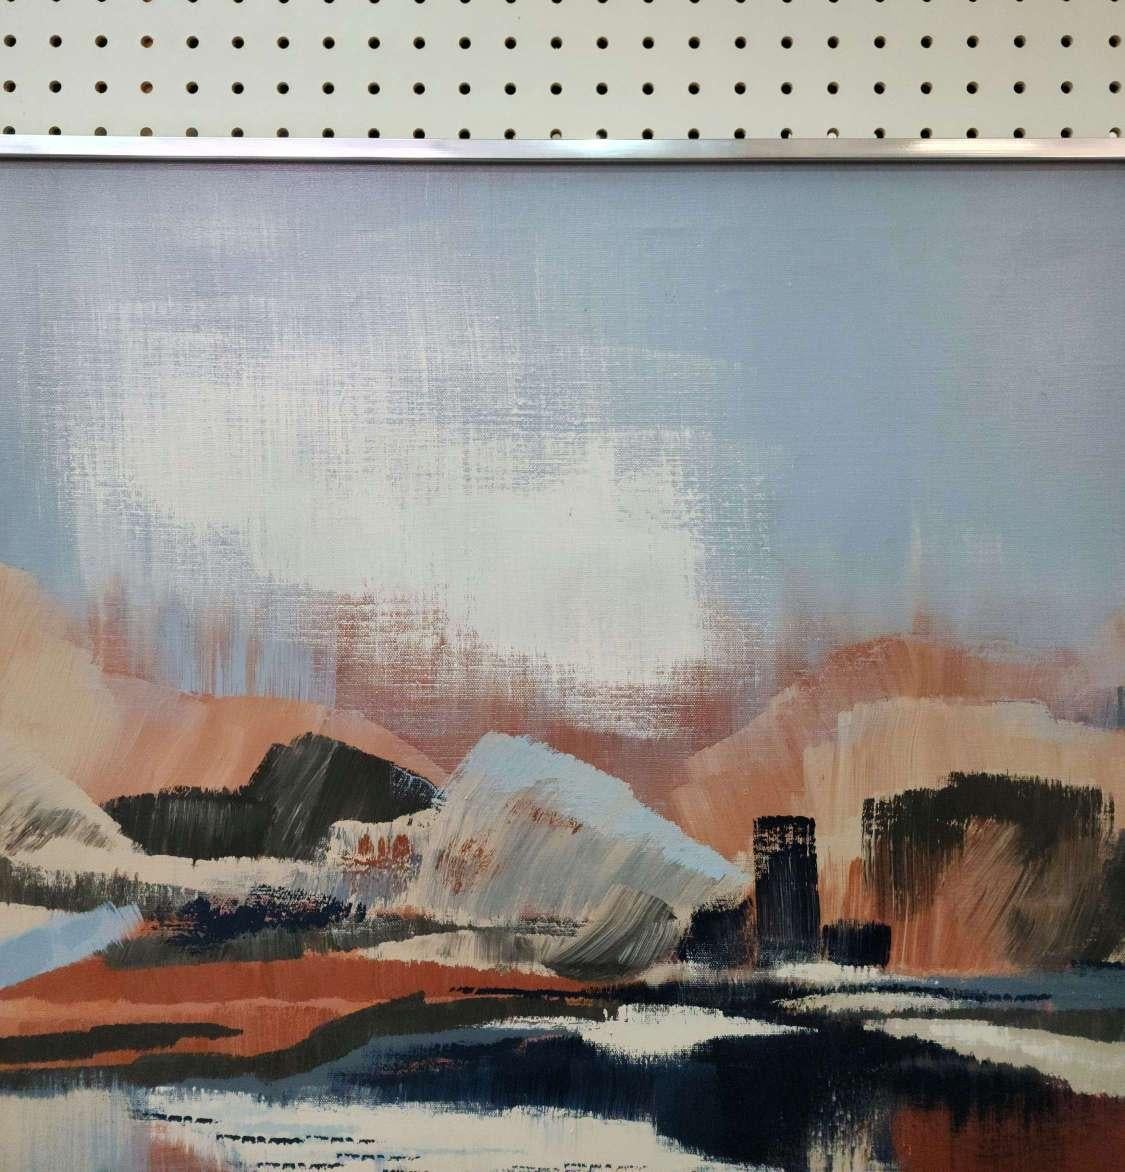 Large Abstract Landscape Painting by Lee Reynolds with Blues, Oranges, Pastels 13